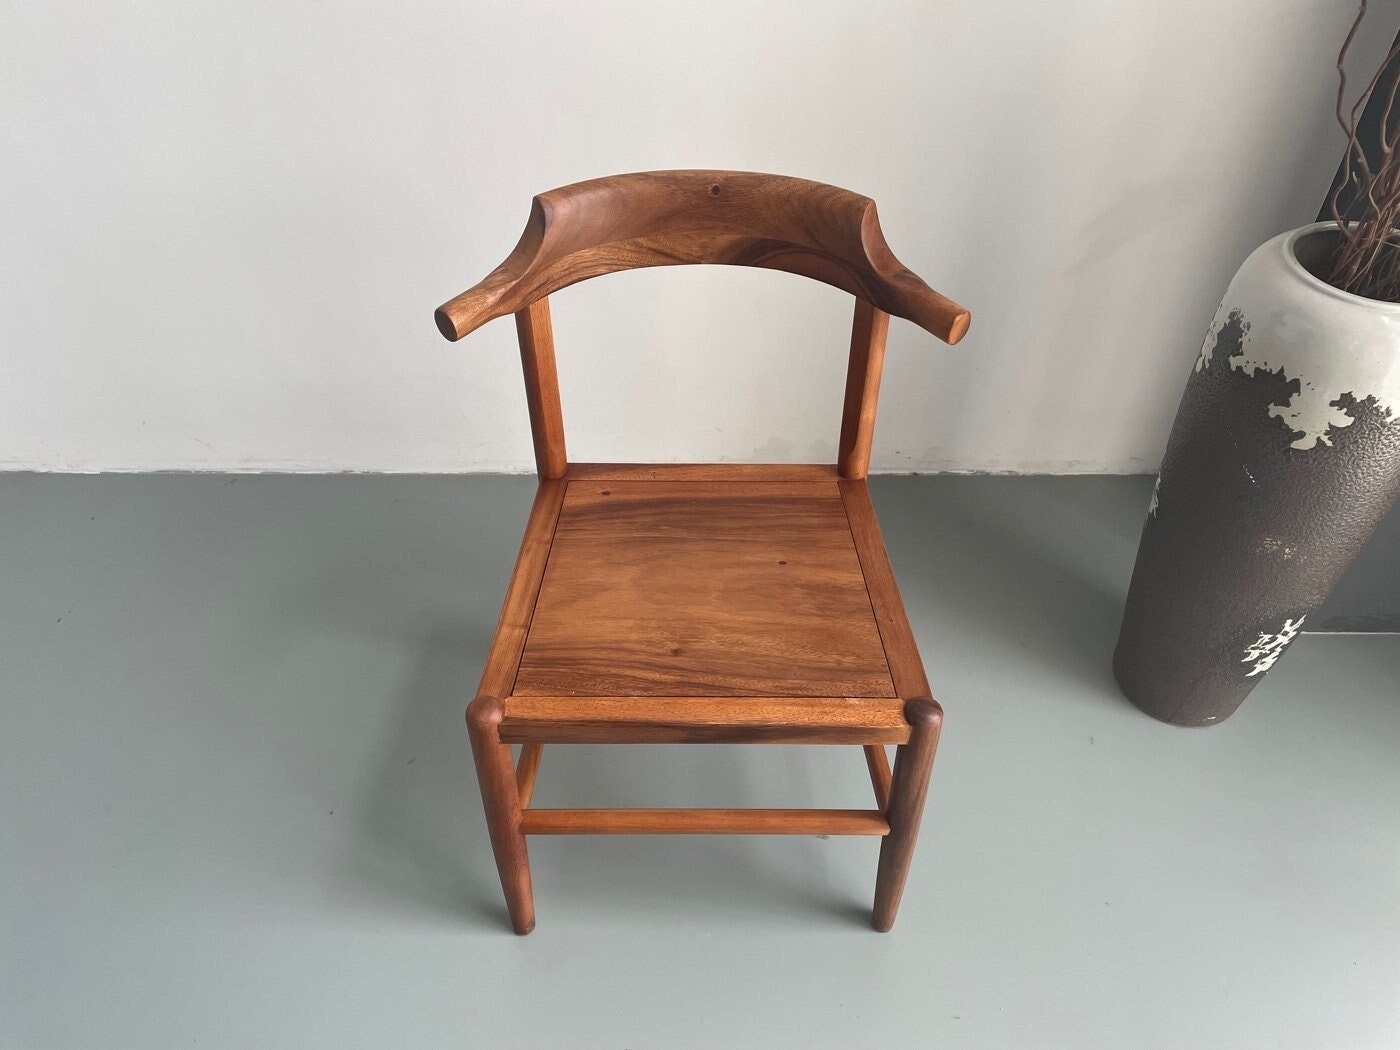 Walnut Dining chair, Dining chair, Family Style chair, Family Dining chair,not black Walnut chair, leather chair